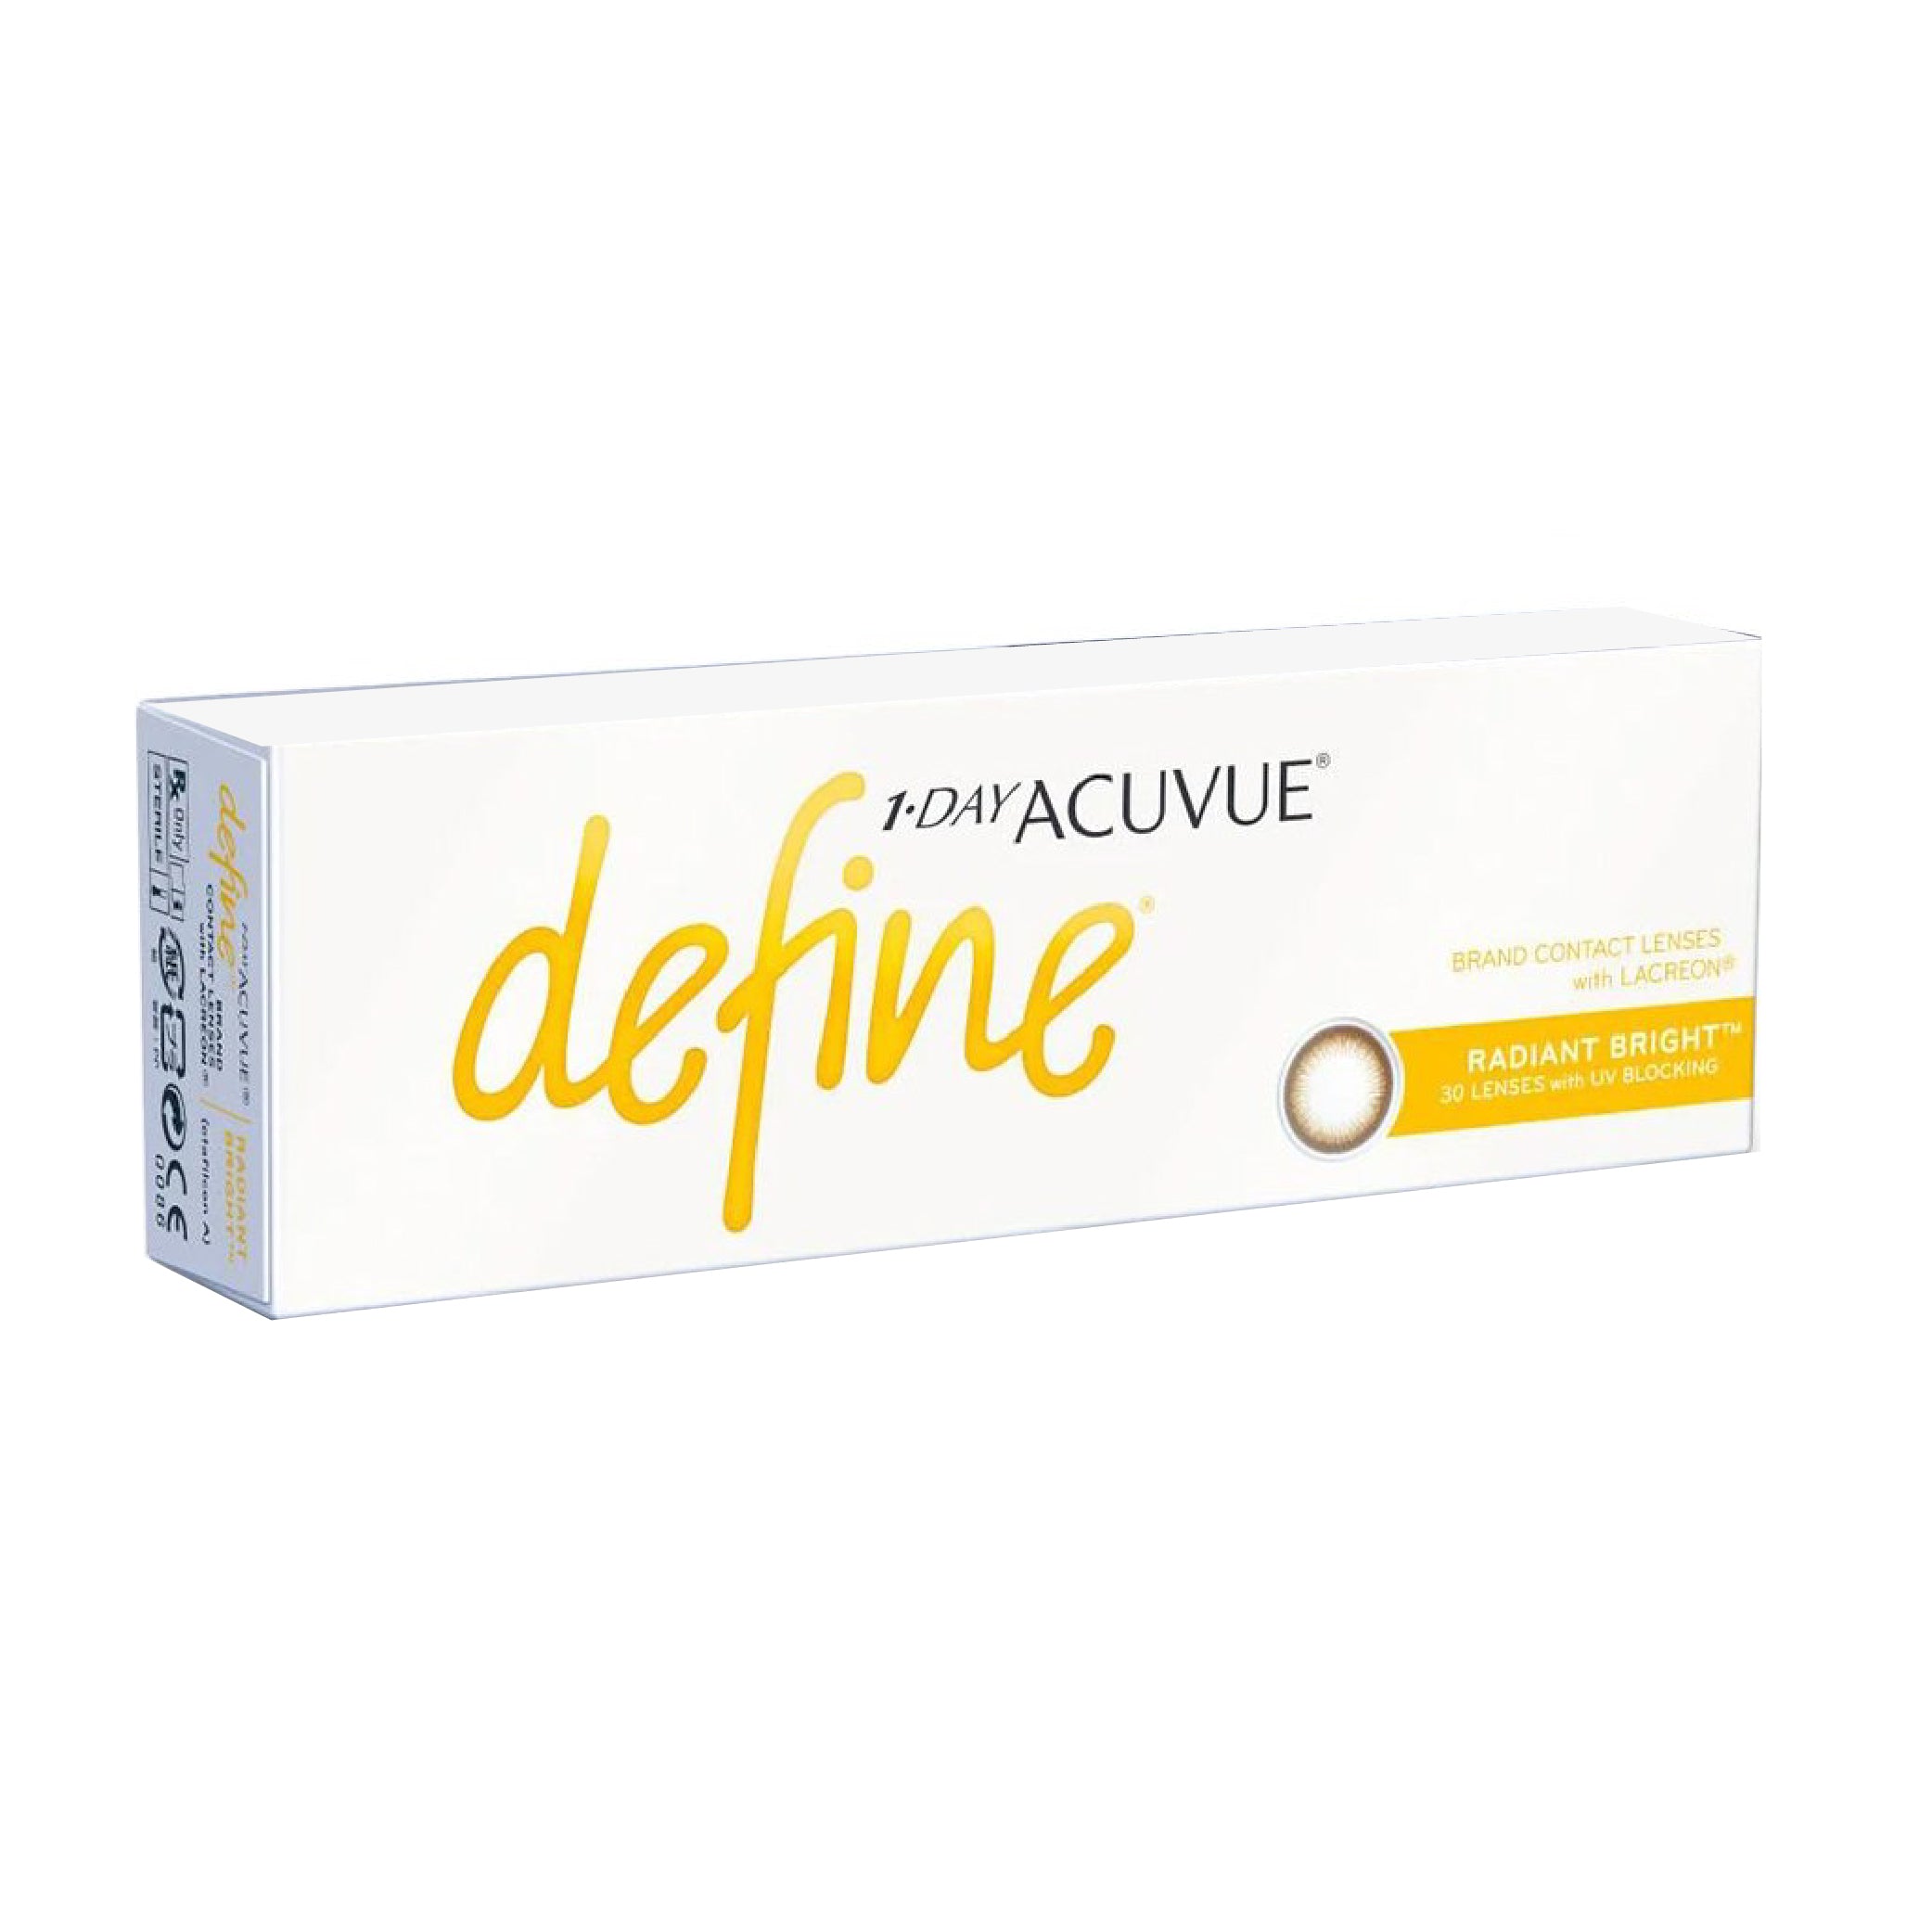 1 Day Acuvue Define - Radiant Bright (30 Pack)